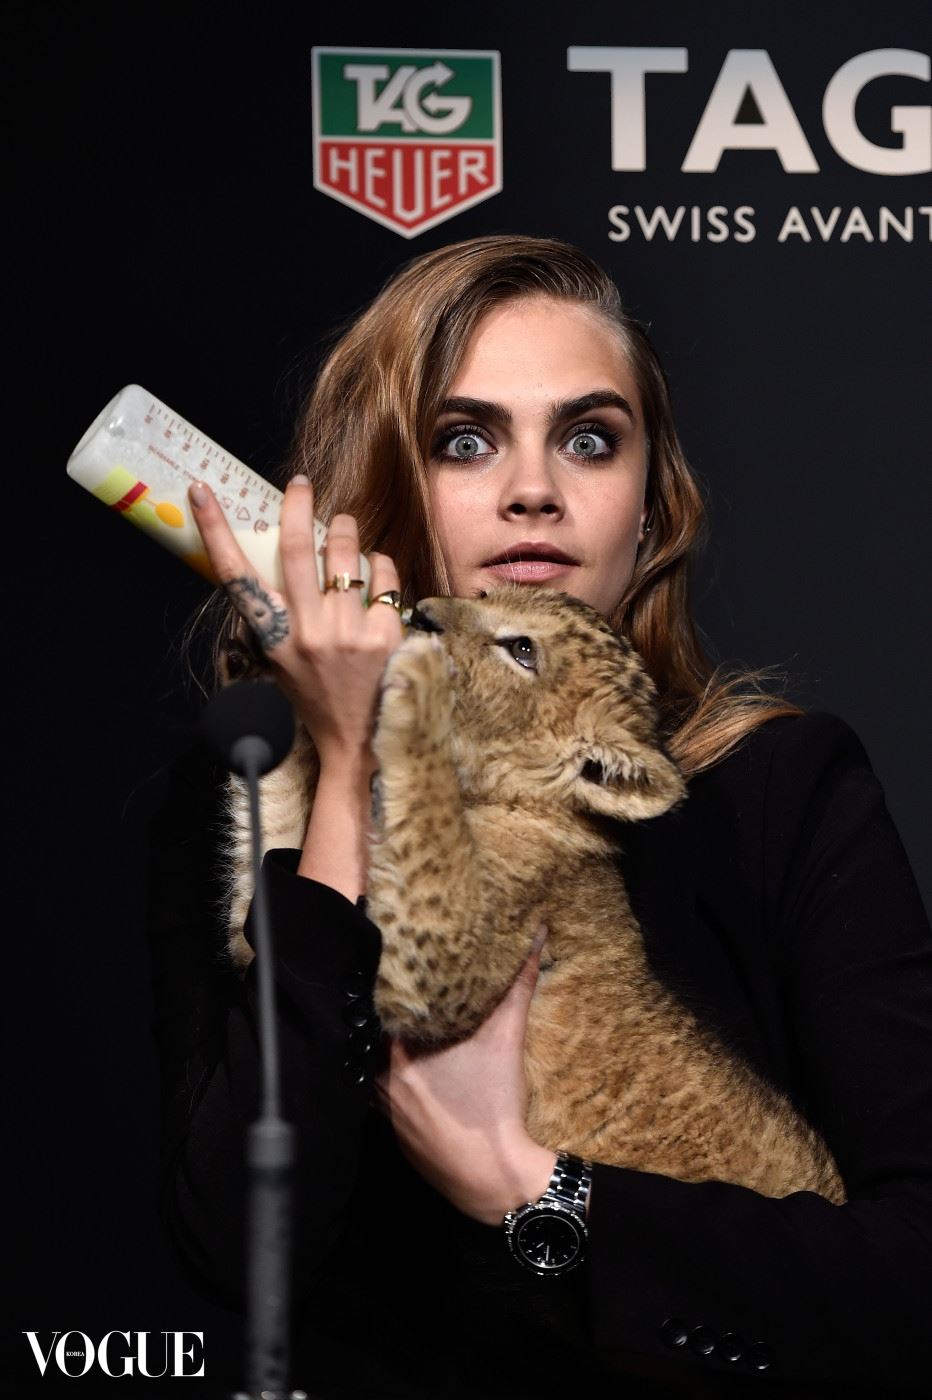 PARIS, FRANCE - JANUARY 23:  Model Cara Delevingne poses with a baby lion as she joins TAG Heuer as Brand Ambassador to launch the new 2015 campaign at Palais des Beaux-Arts on January 23, 2015 in Paris, France.  (Photo by Pascal Le Segretain/Getty Images for TAG Heuer)